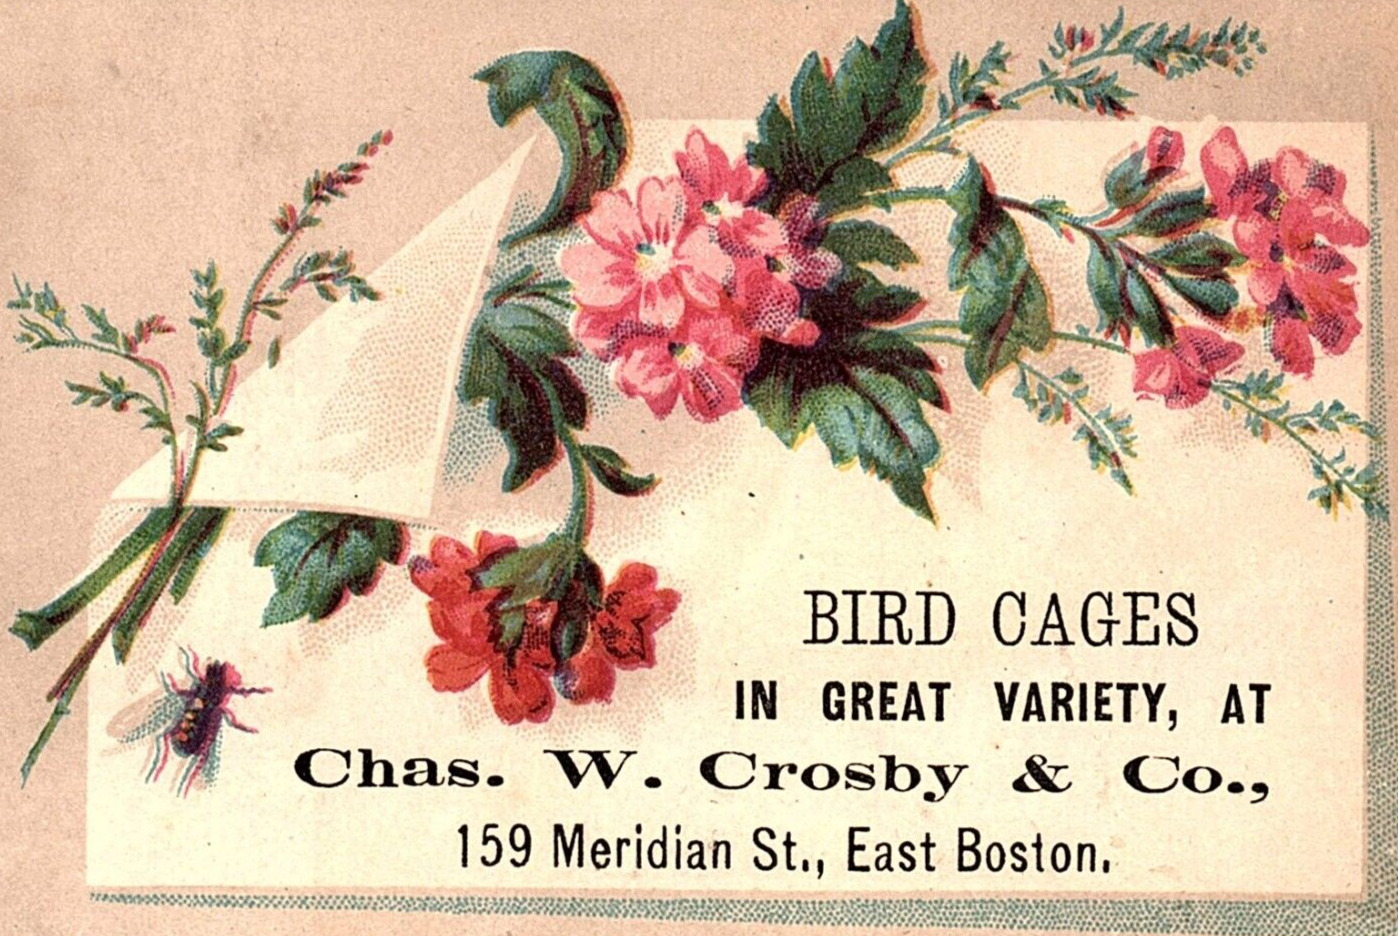 c1880 CHAS. W. CROSBY & CO BIRD CAGES EAST BOSTON MA VICTORIAN TRADE CARD Z1123